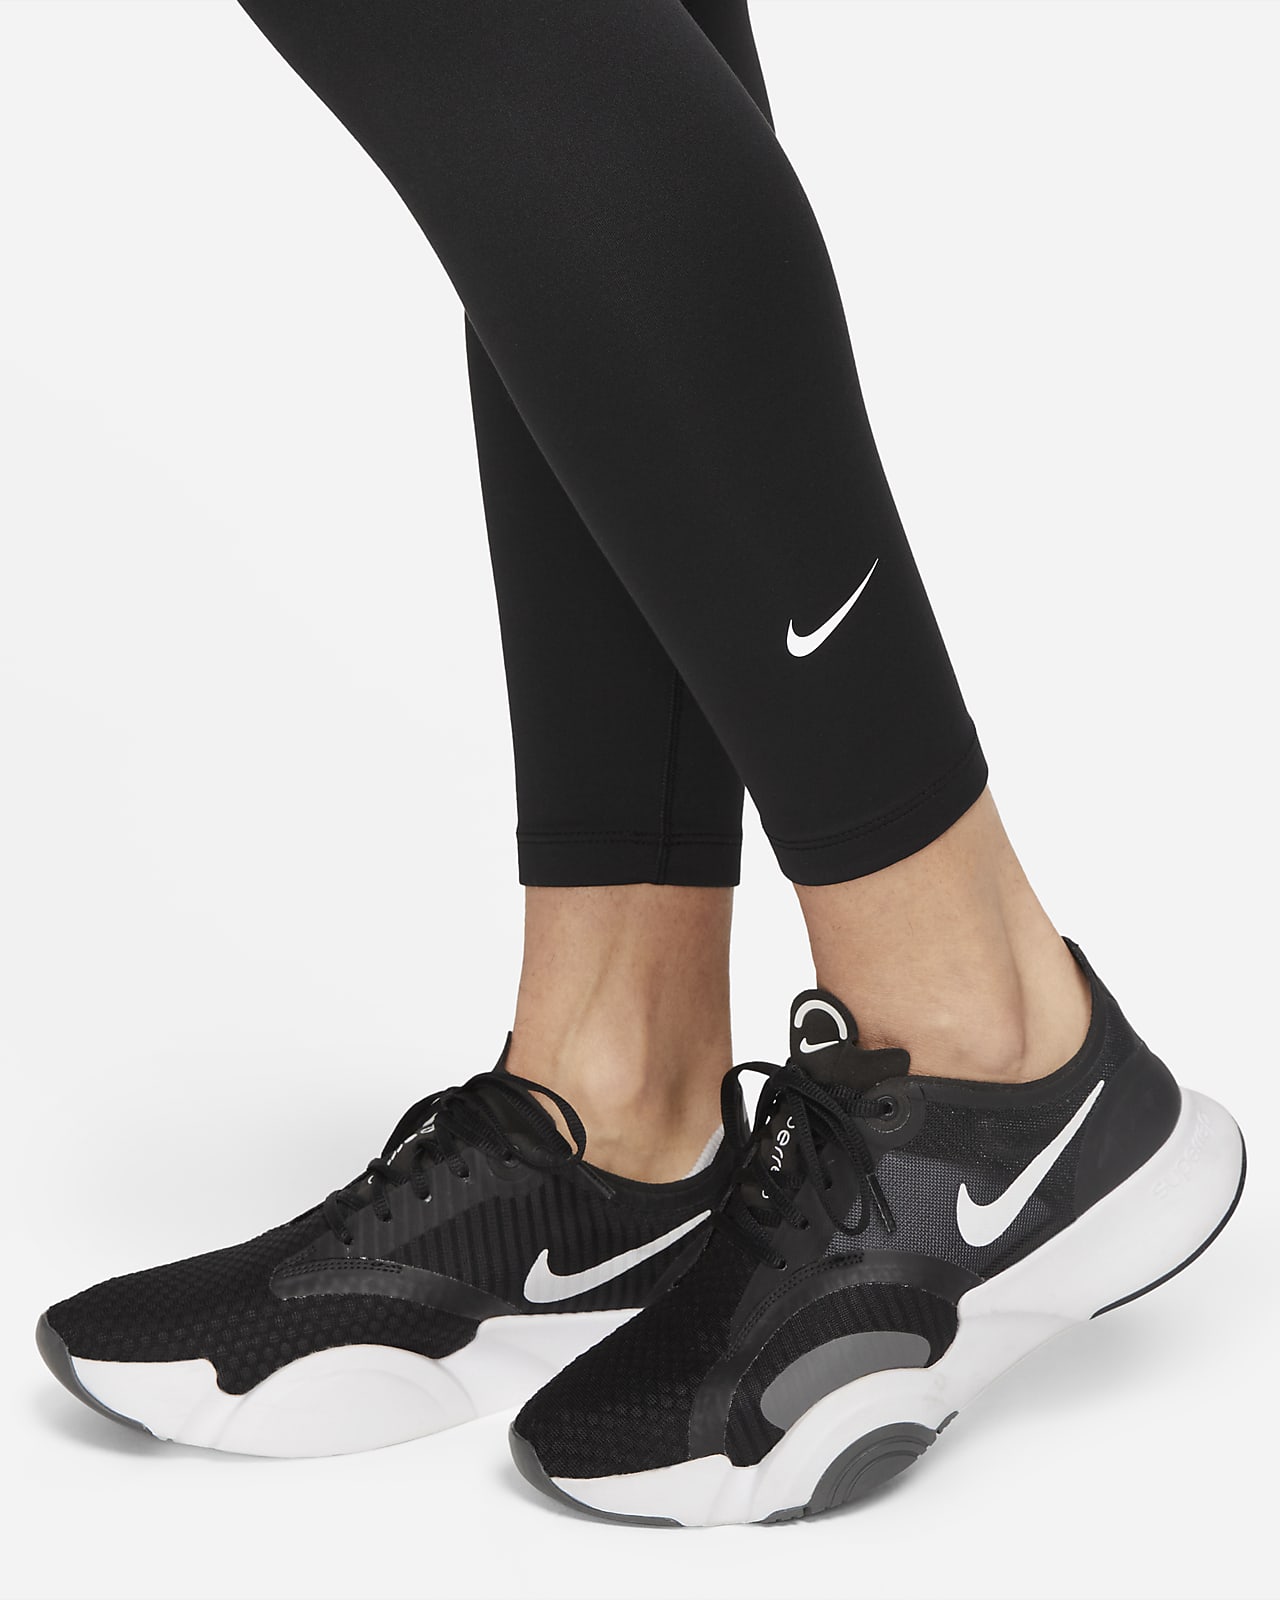 Nike Therma-FIT One Women\'s Leggings. High-Waisted 7/8